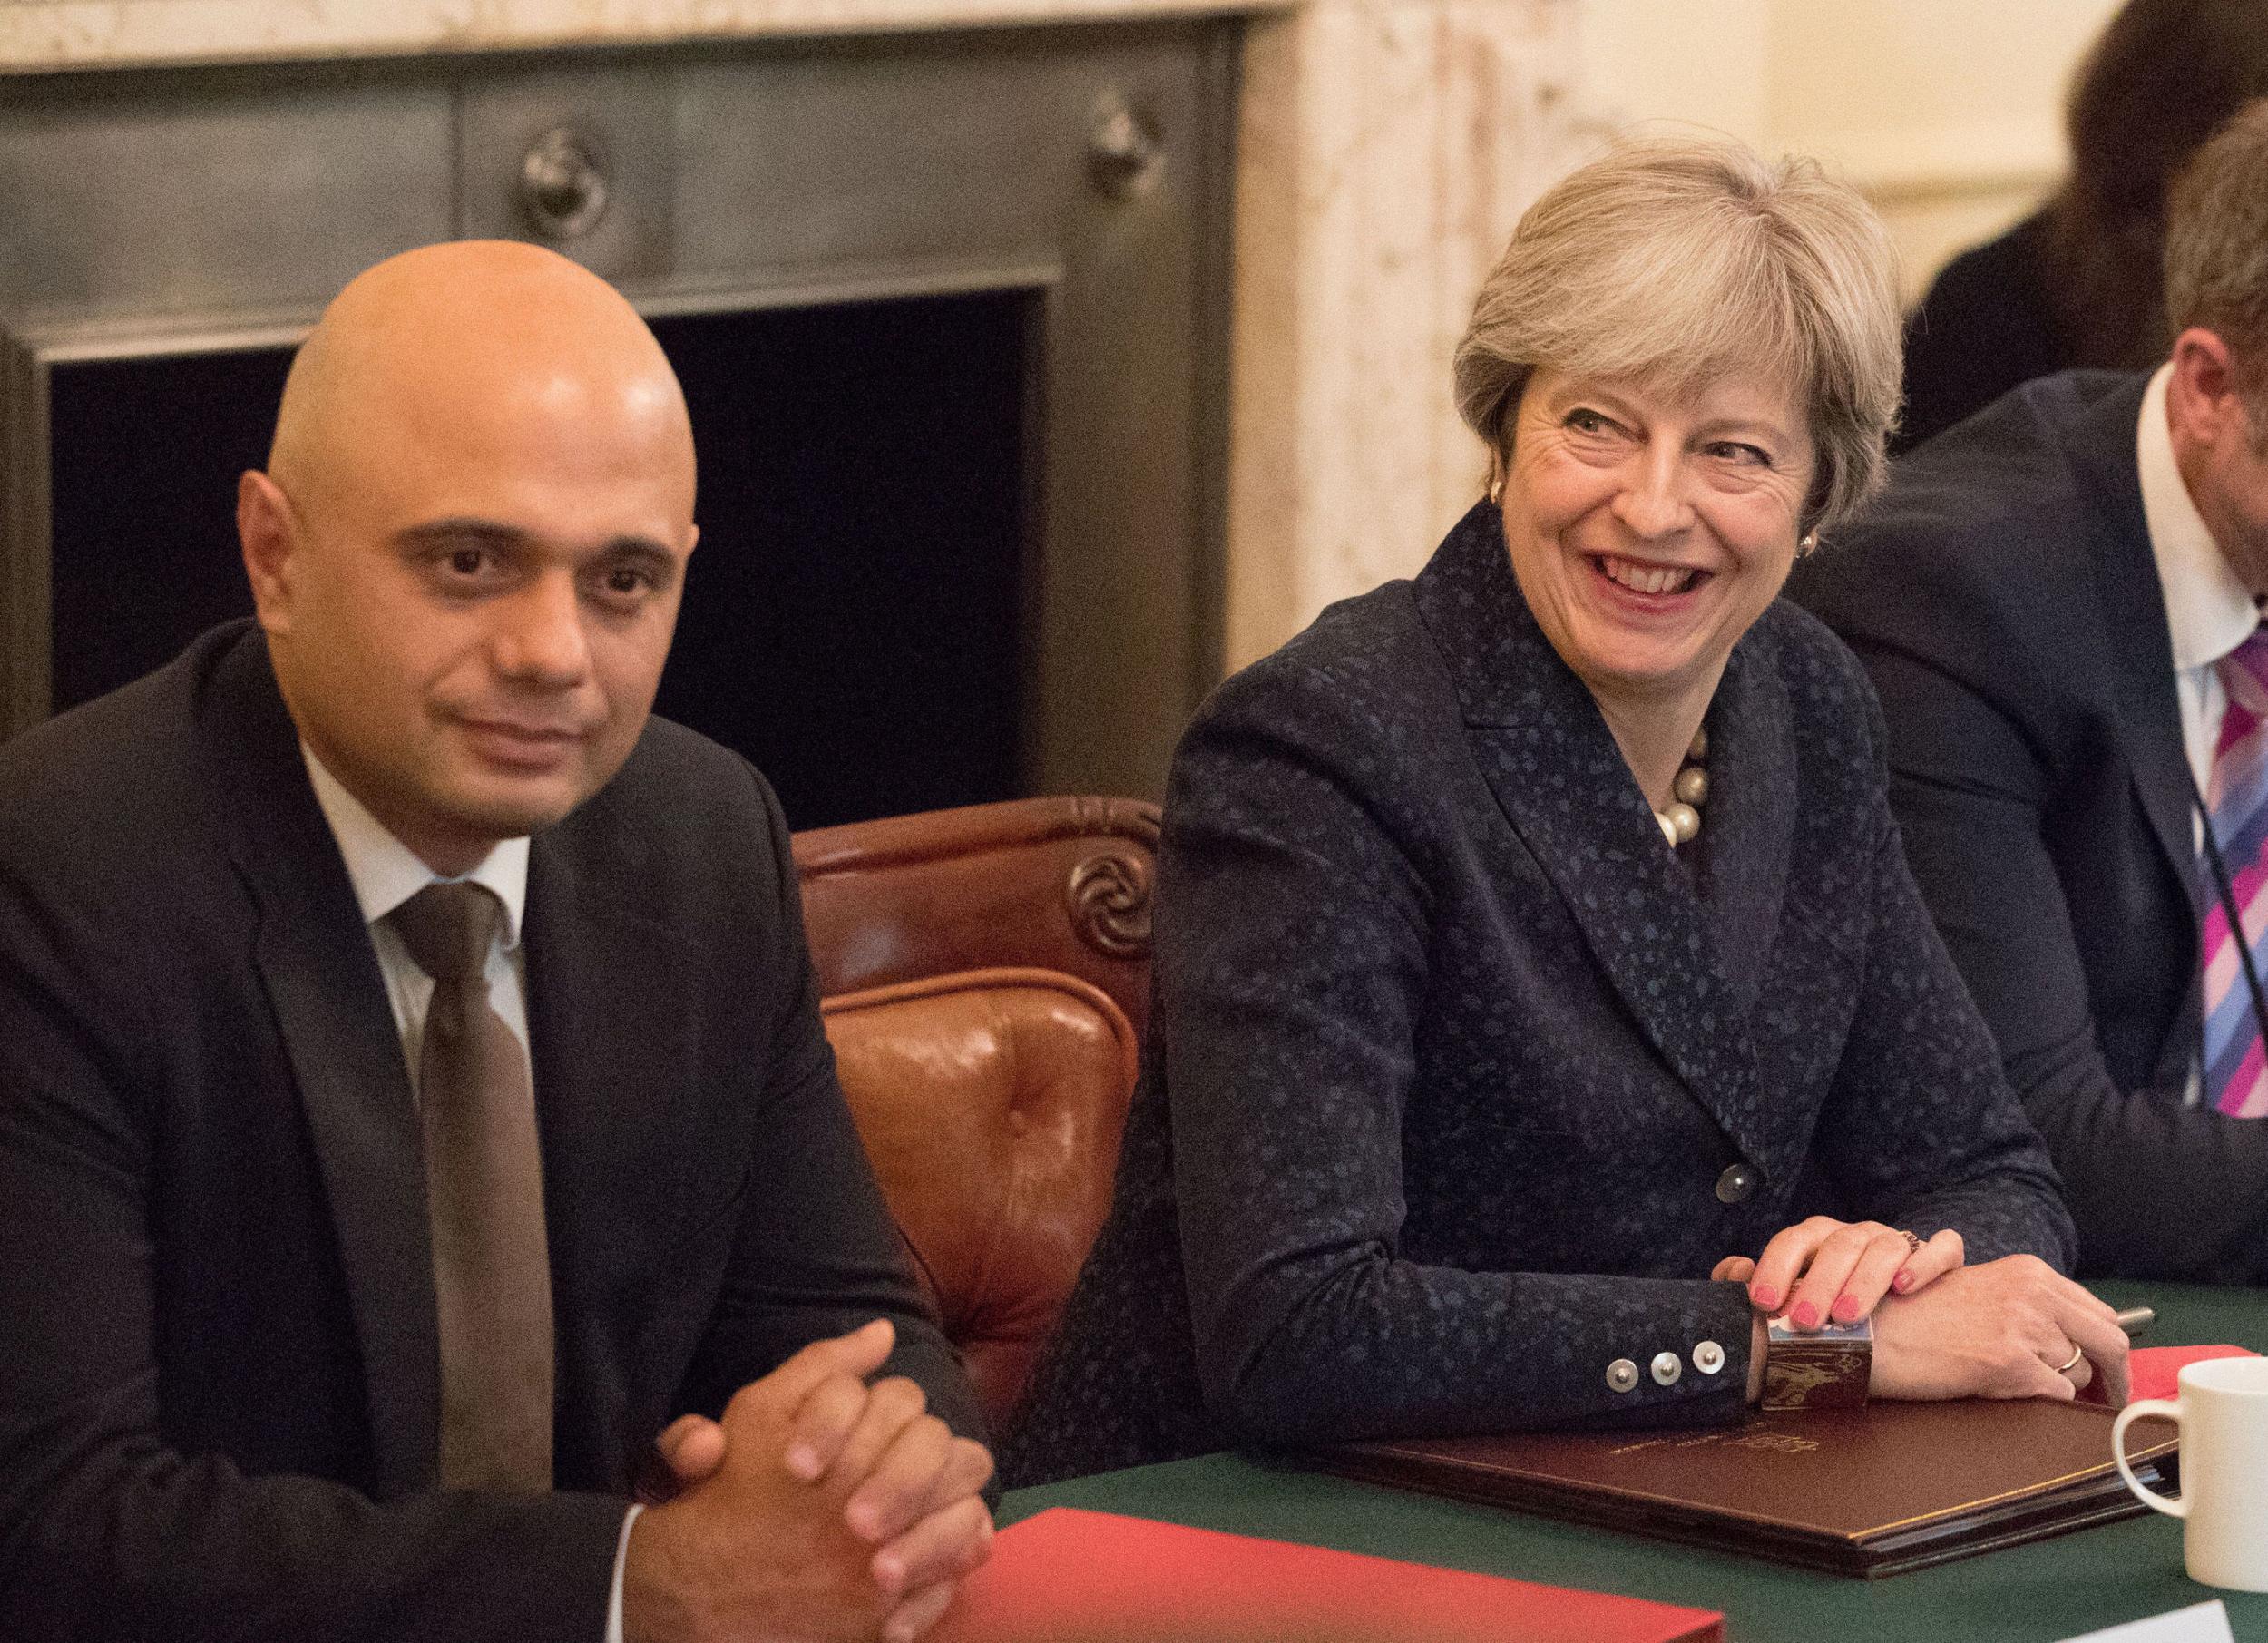 Sajid Javid has publicly called for police to be given more resources in an upcoming government spending review